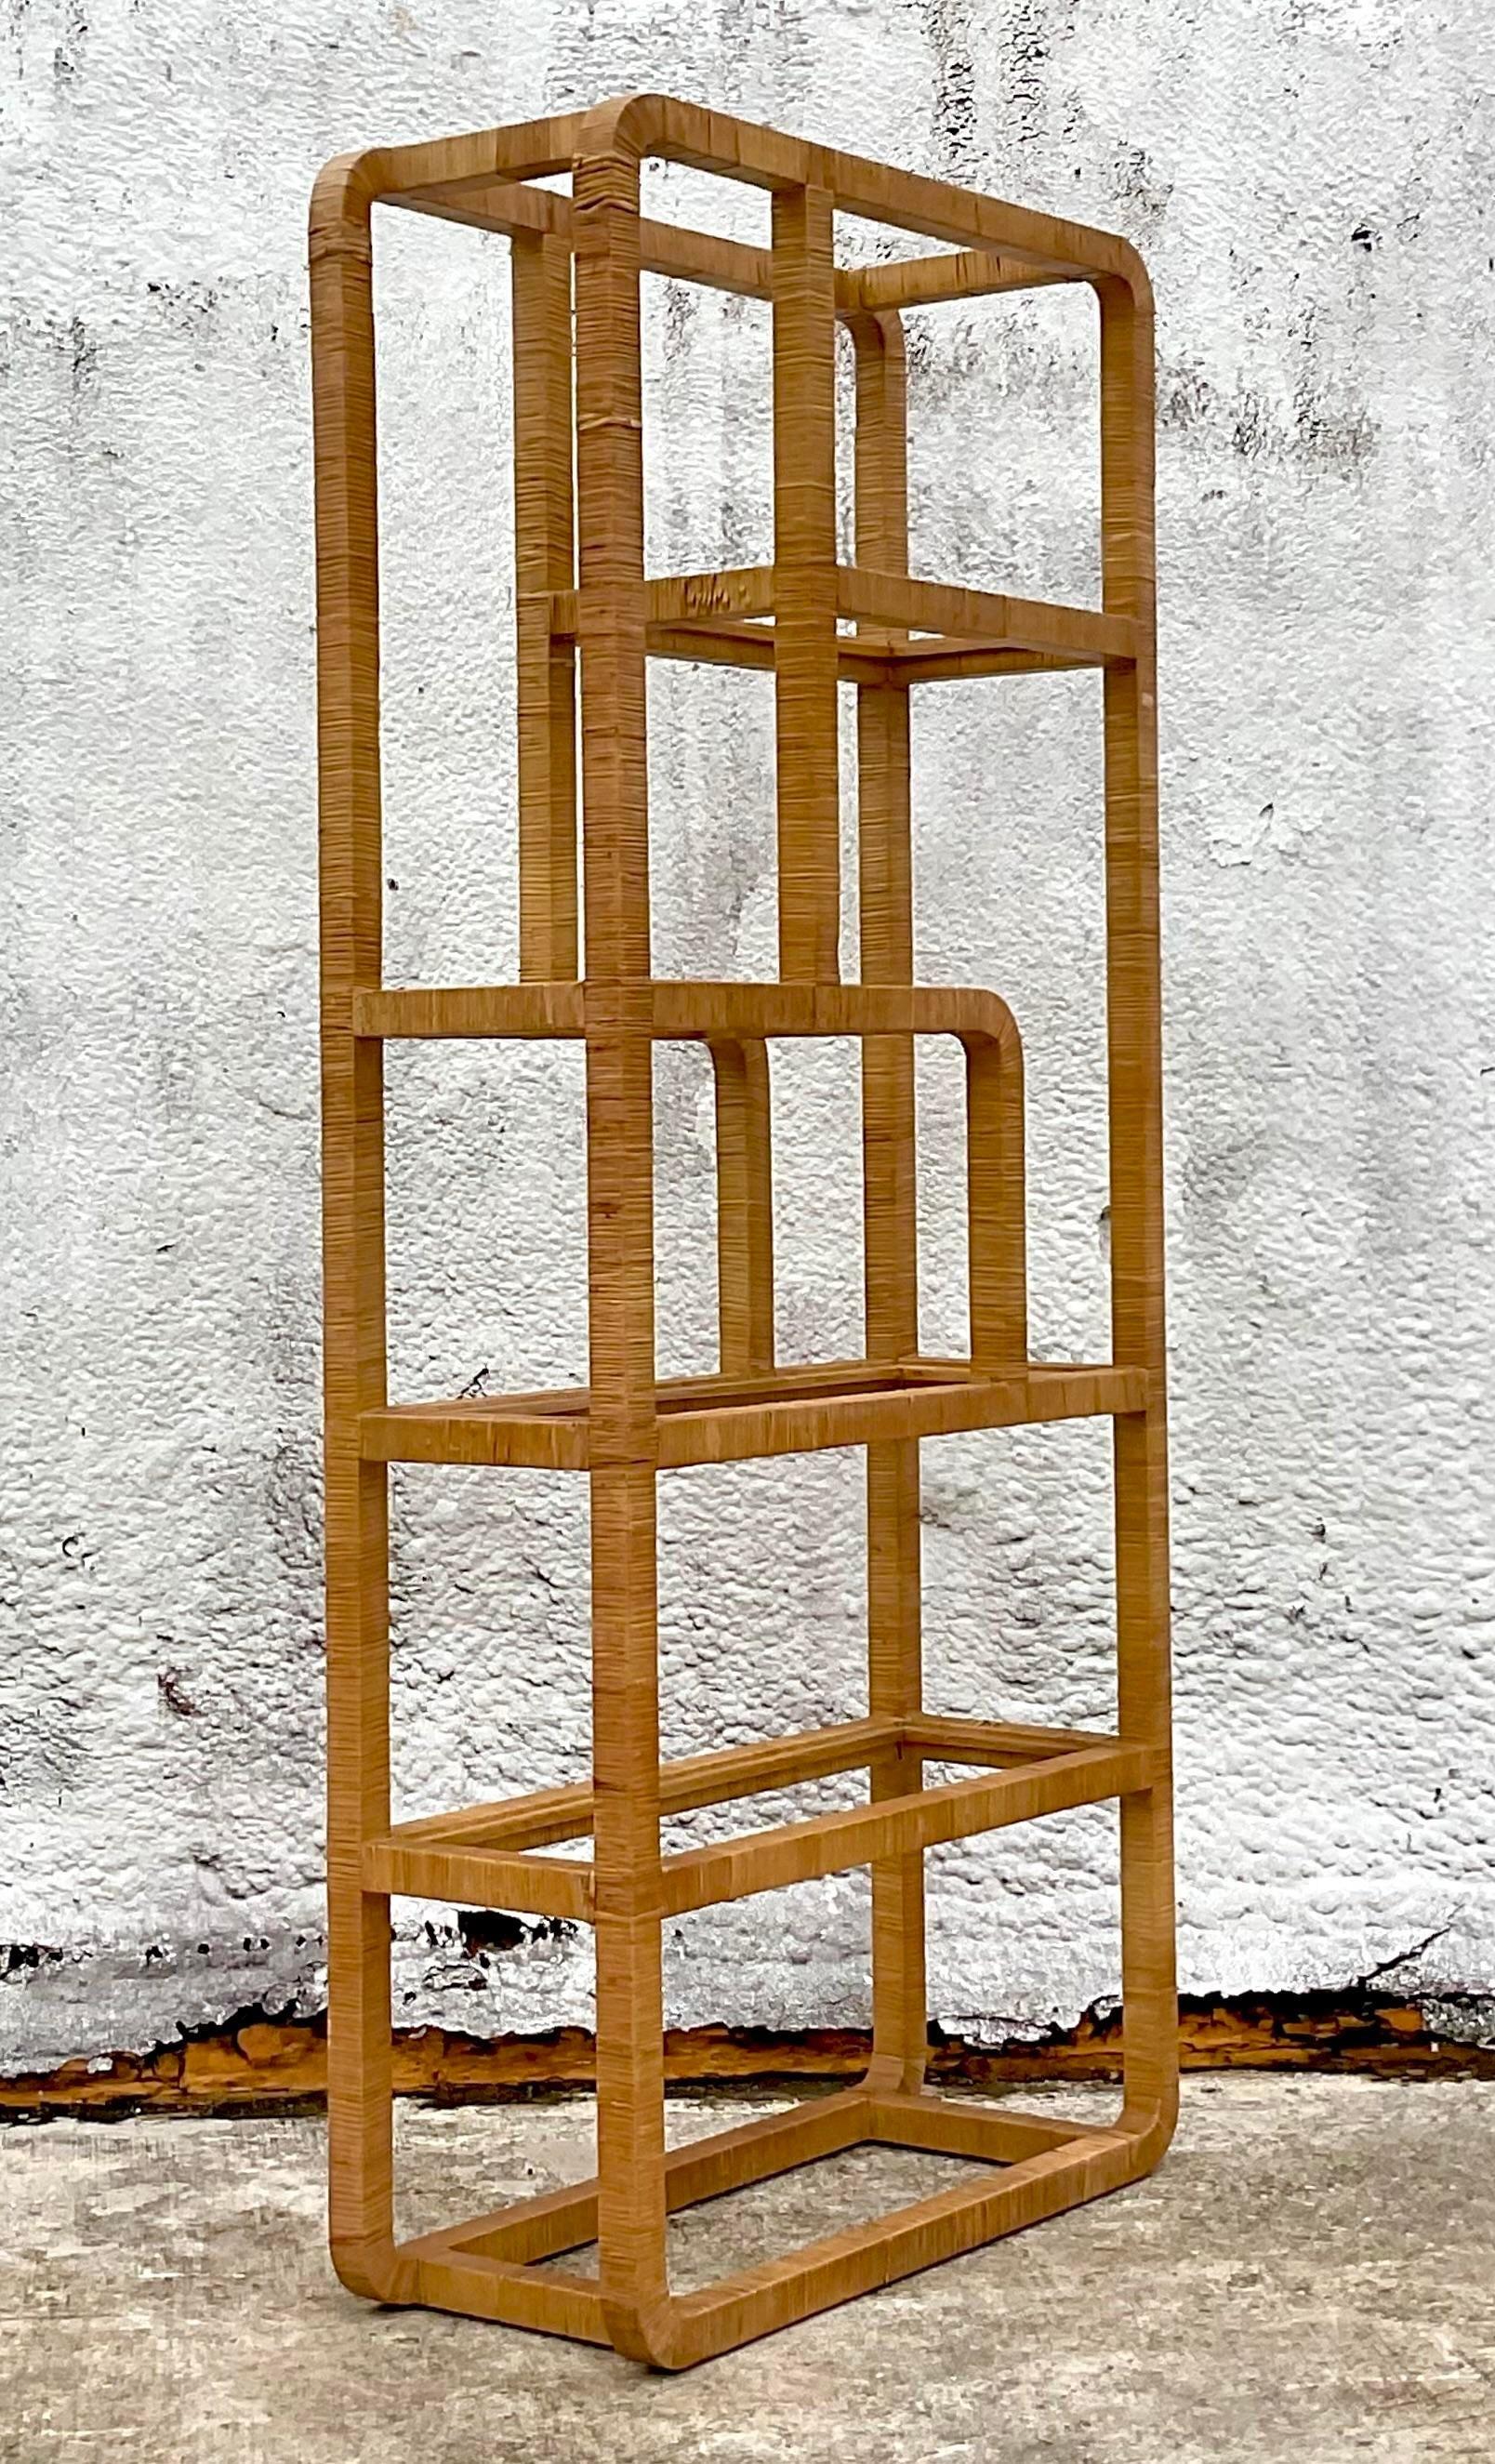 A fabulous vintage Coastal etagere. A chic wrapped rattan in an asymmetrical design. Inset glass shelves. Acquired from a Palm Beach estate.